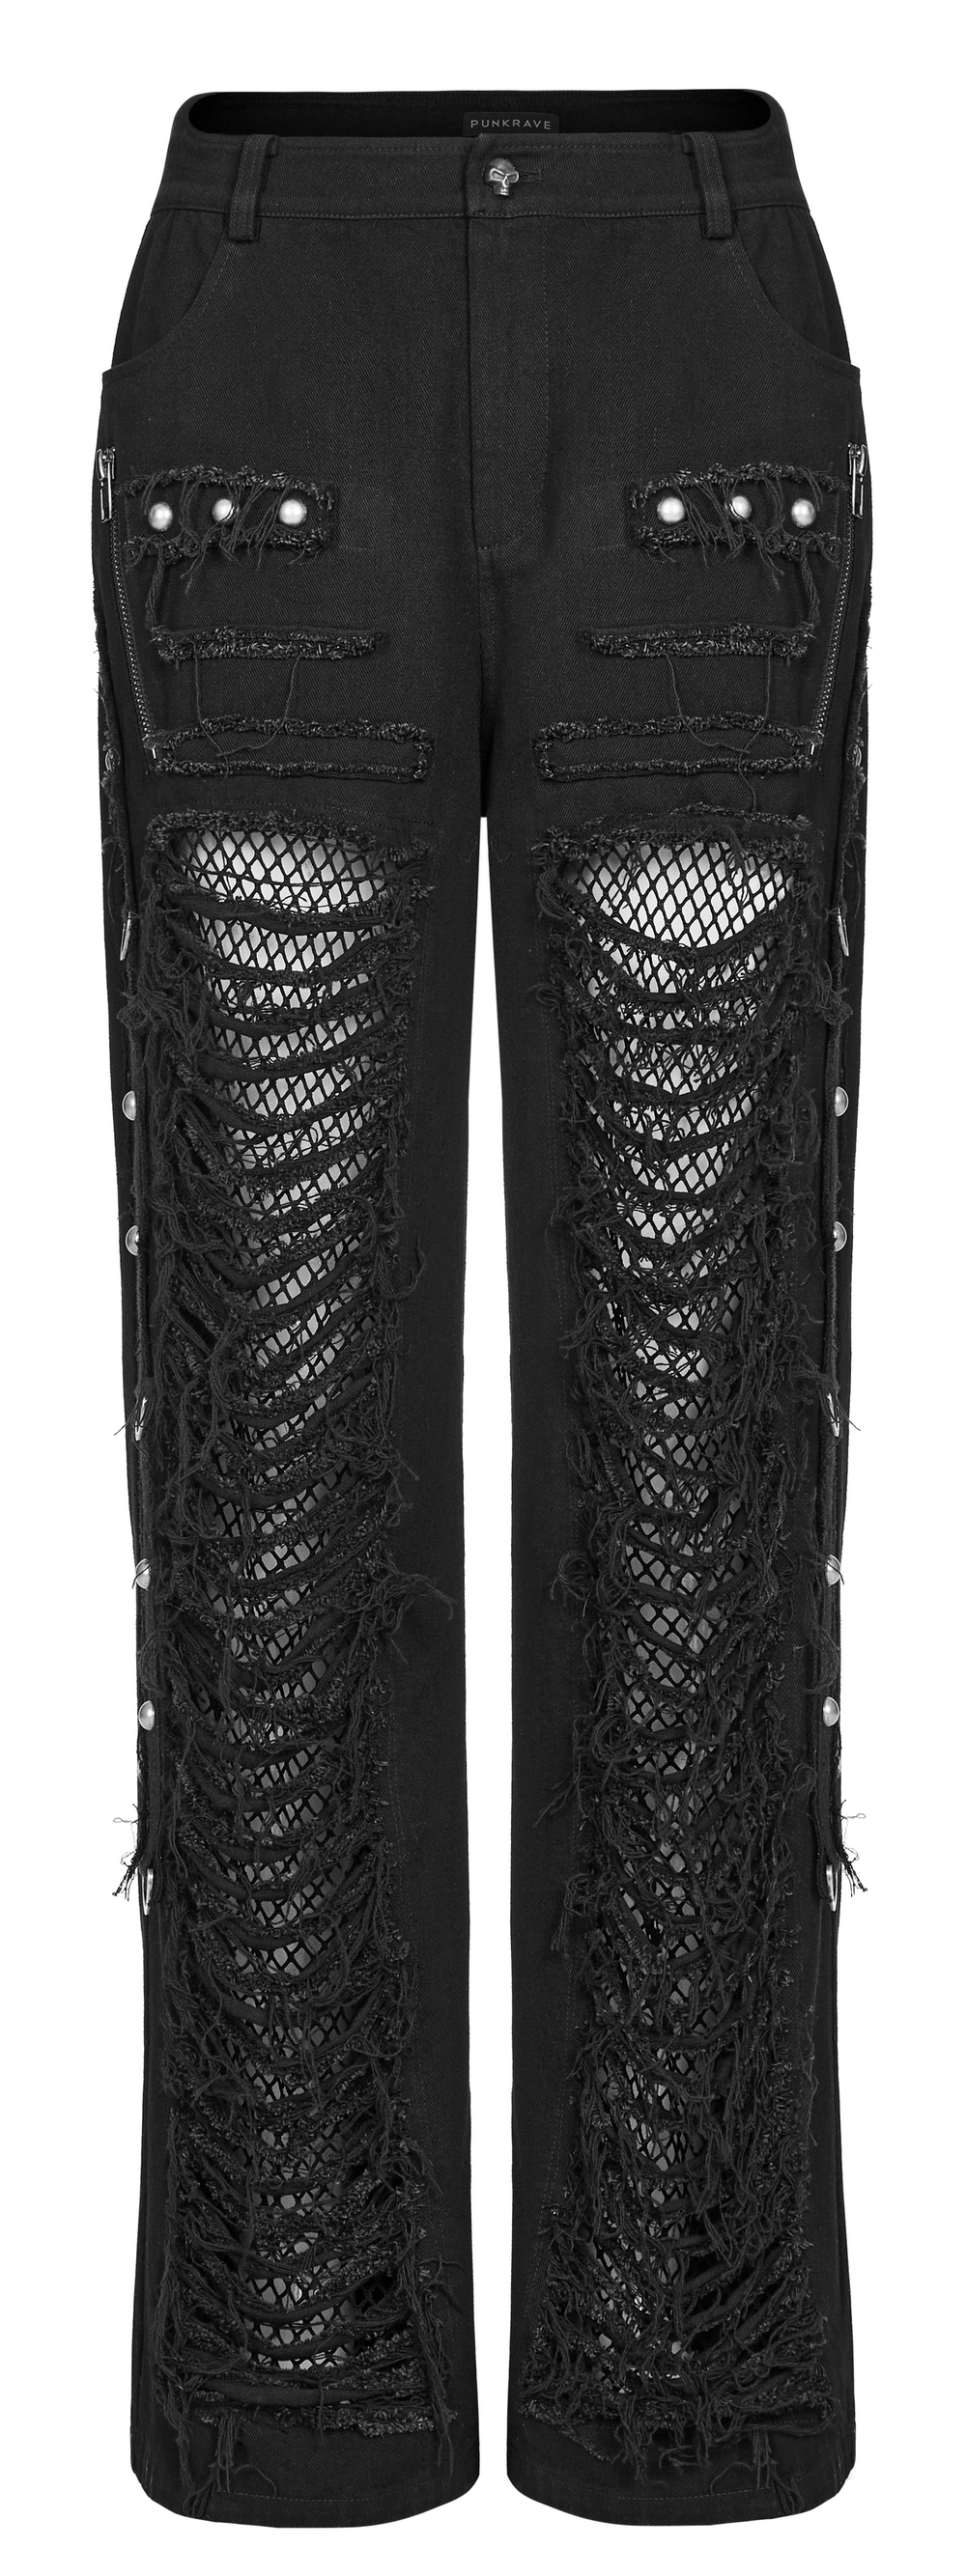 Black Gothic Lace-Up Chain Cargo Pants for Men